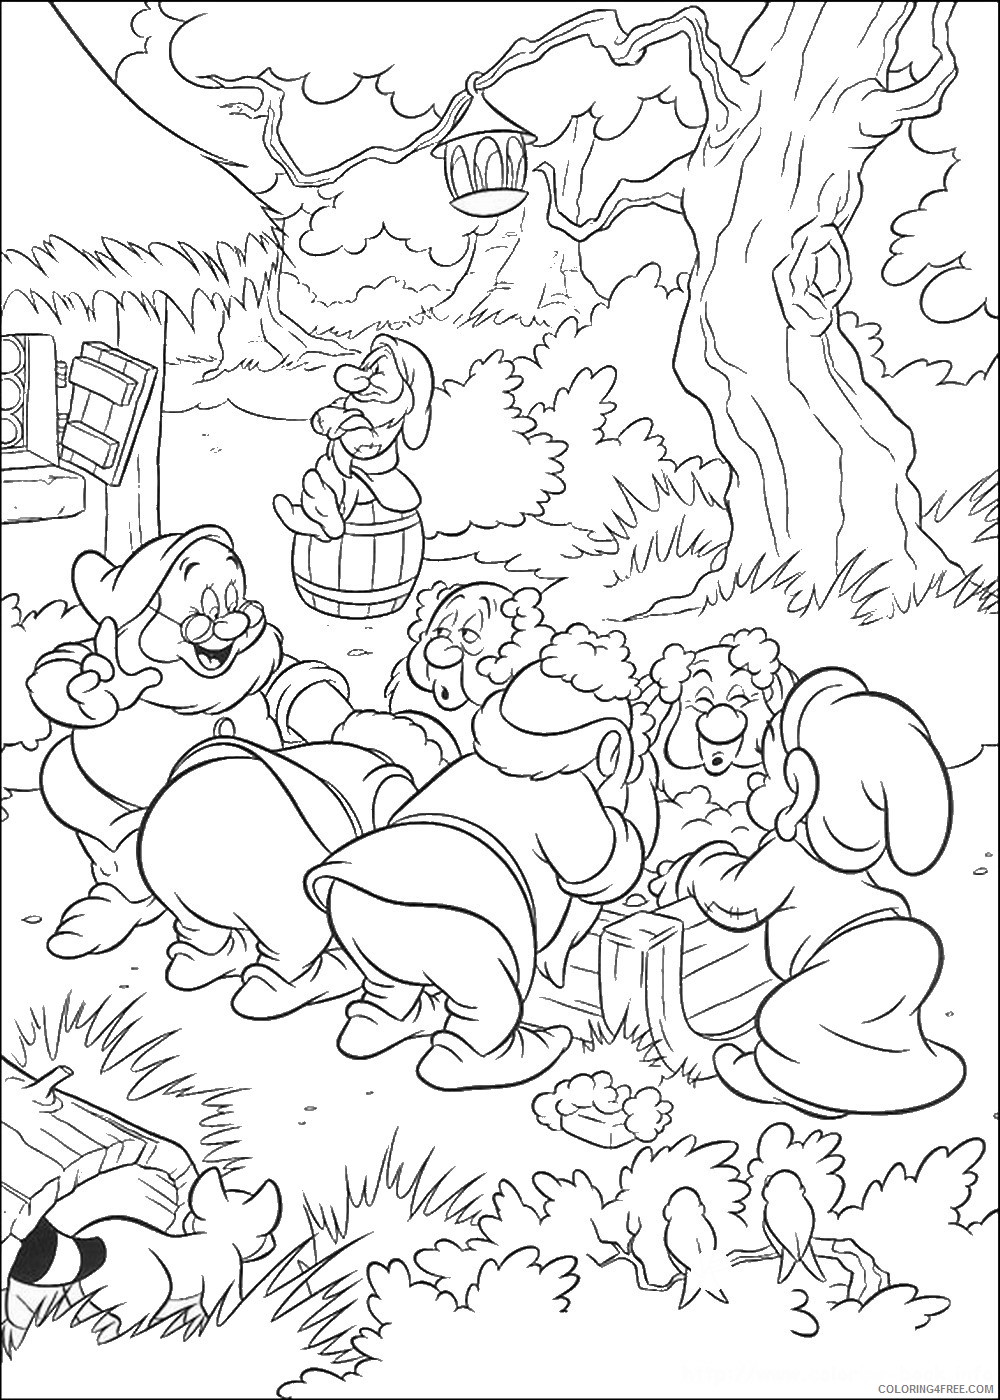 Snow White Coloring Pages Cartoons snow_white_cl_67 Printable 2020 5742 Coloring4free